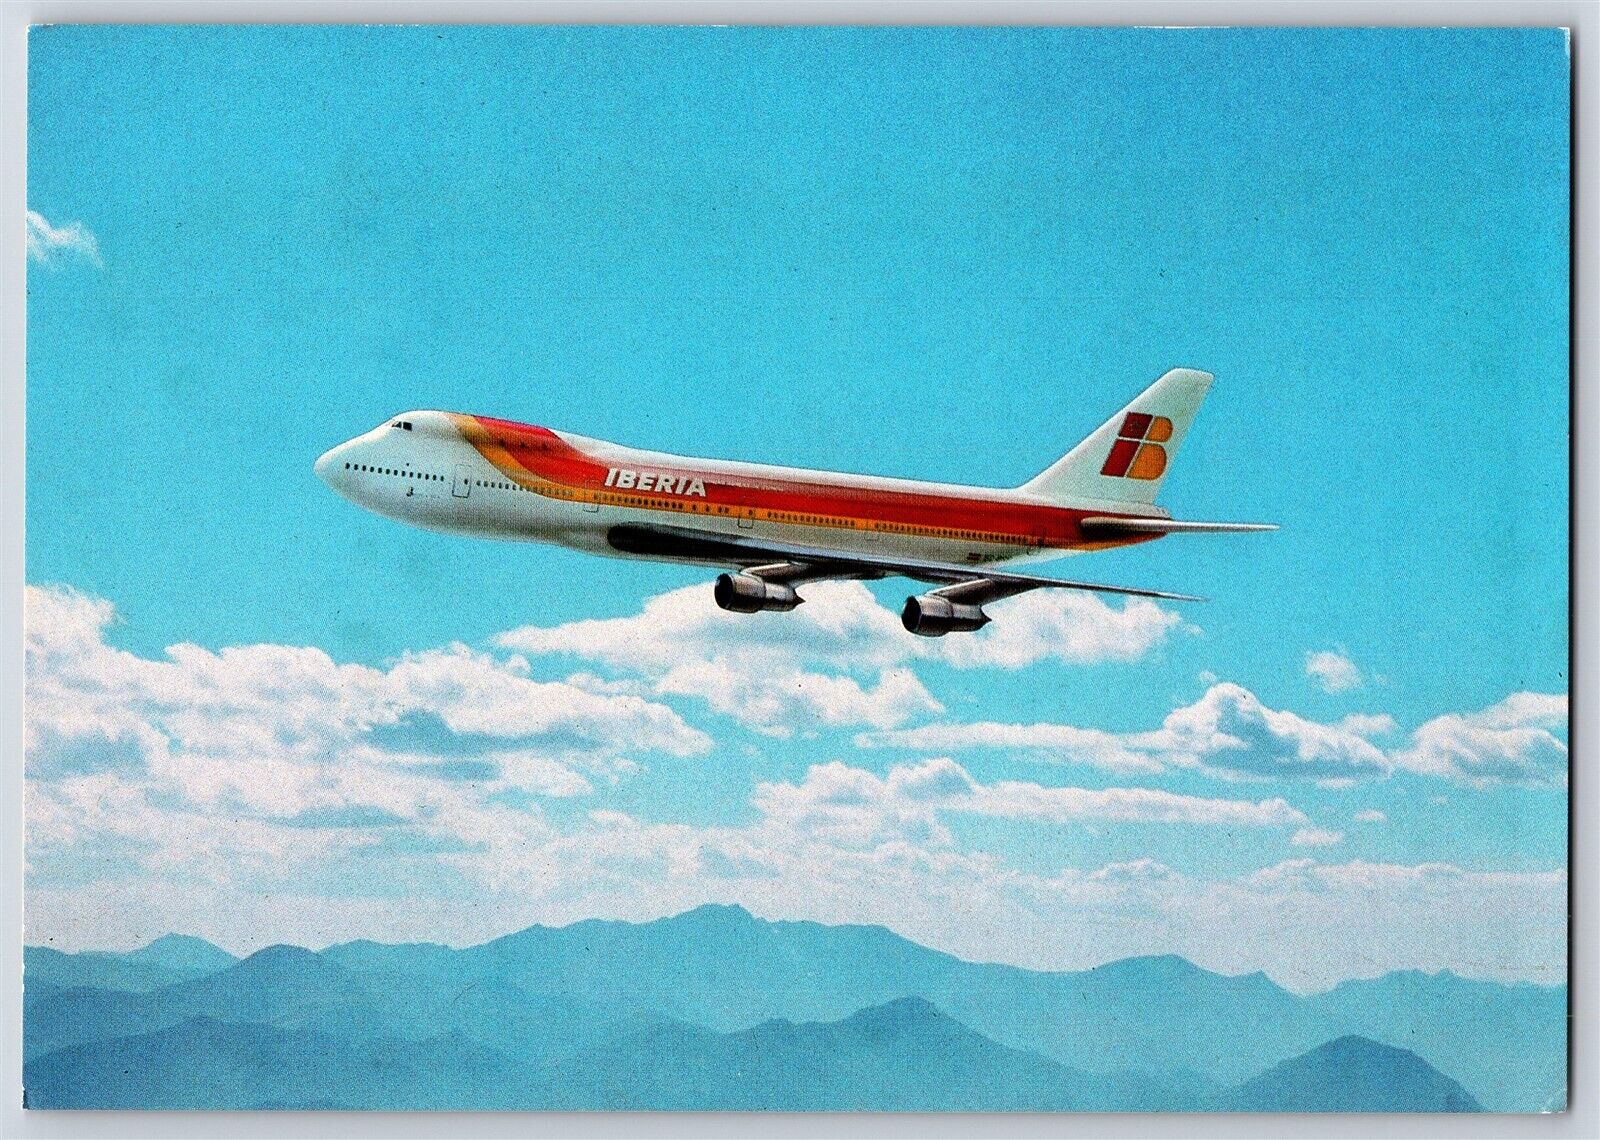 Airplane Postcard Iberia Airlines Boeing 747 Plane Stats In German on Back BM12